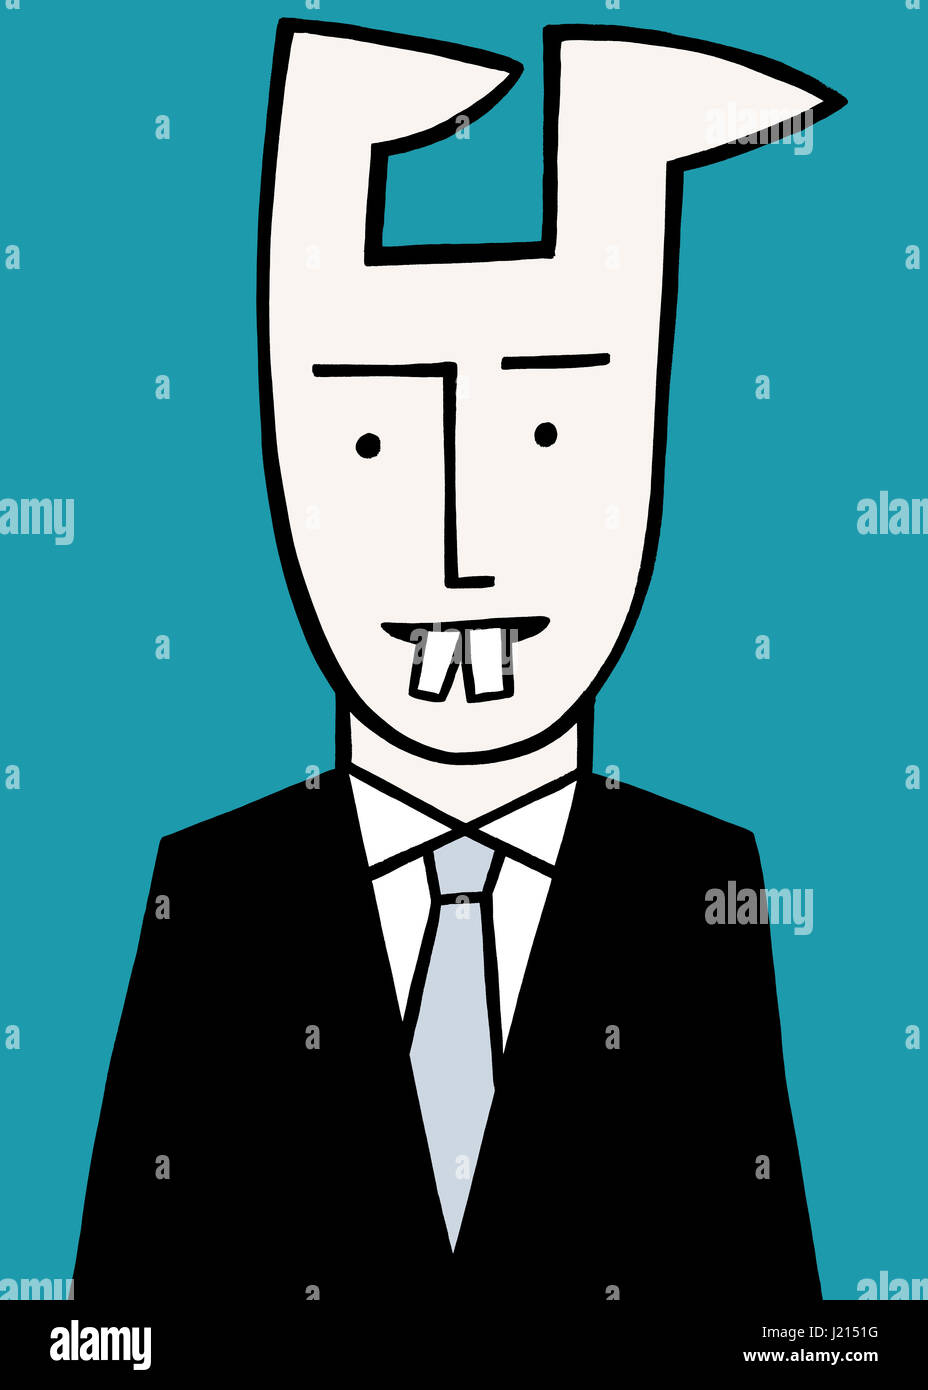 Business rabbit. A business illustration about thinking different thoughts. Stock Photo